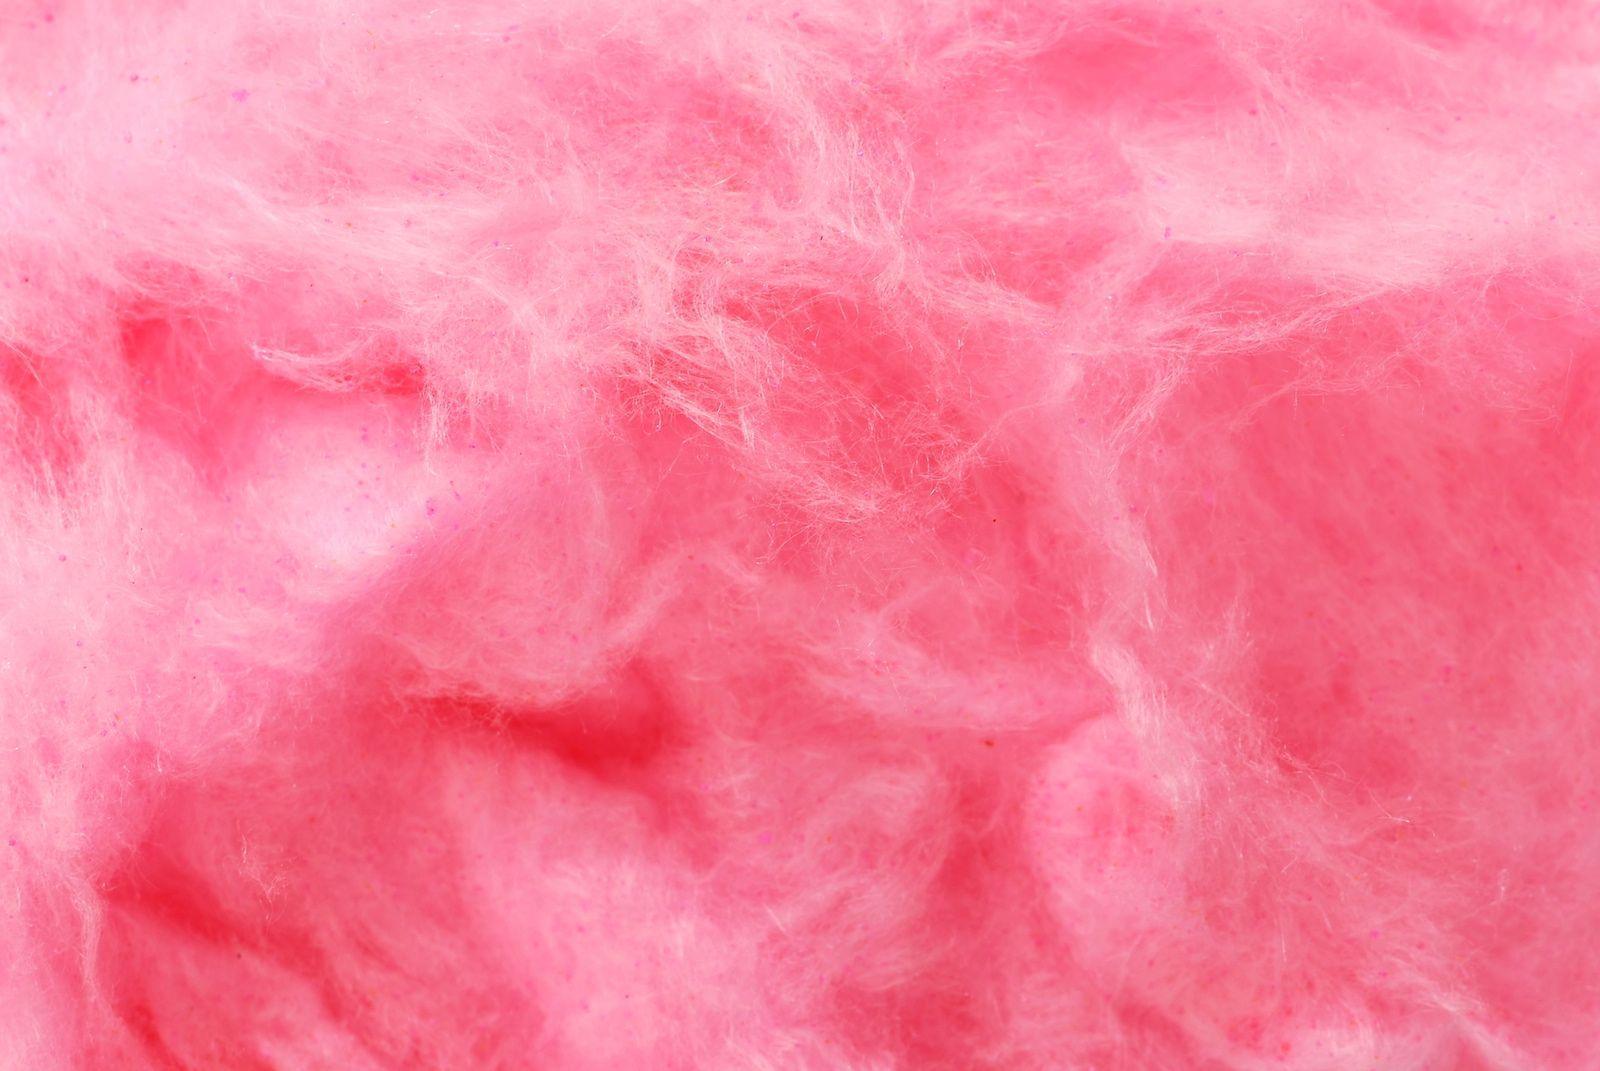 Cotton Candy Wallpaper High Quality